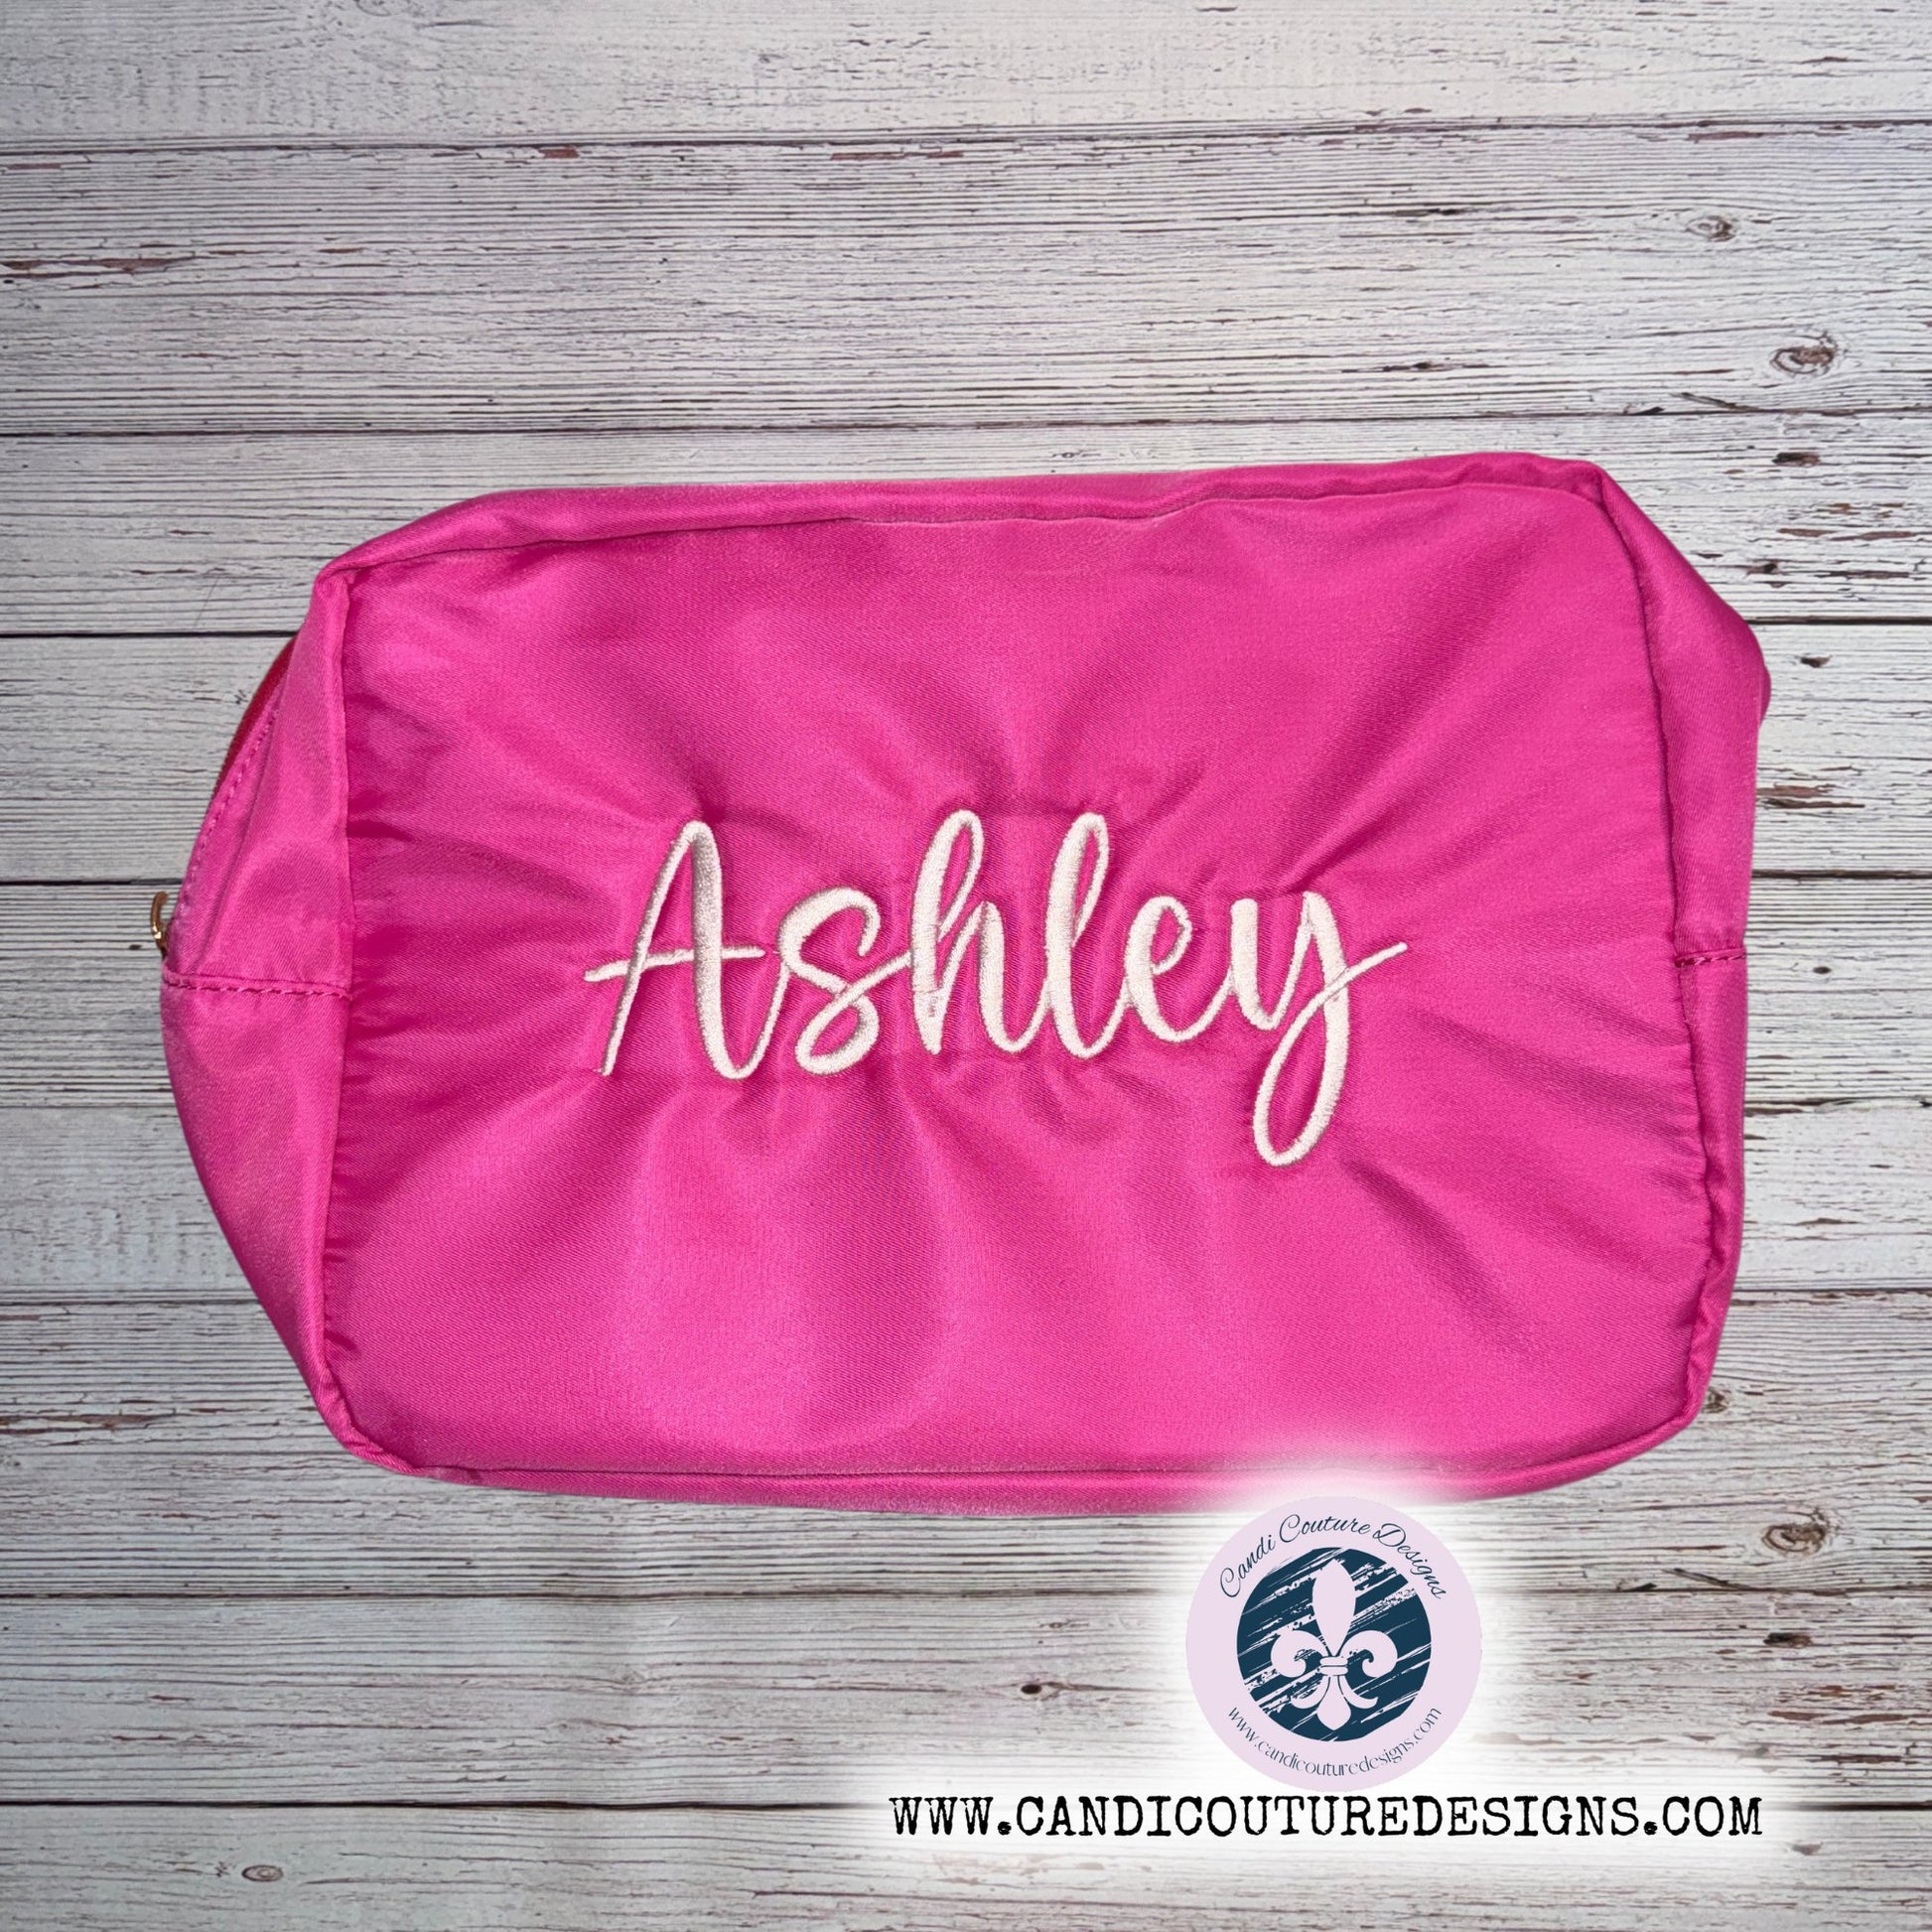 Large Monogrammed Makeup Bag, Personalized Cosmetic Organizer, Custom Travel Toiletry Case, Spacious Vanity Pouch, Bridesmaid Gift, High - Quality Embroidered Name Bag, Stylish Beauty Accessories Holder - Candicouturedesigns